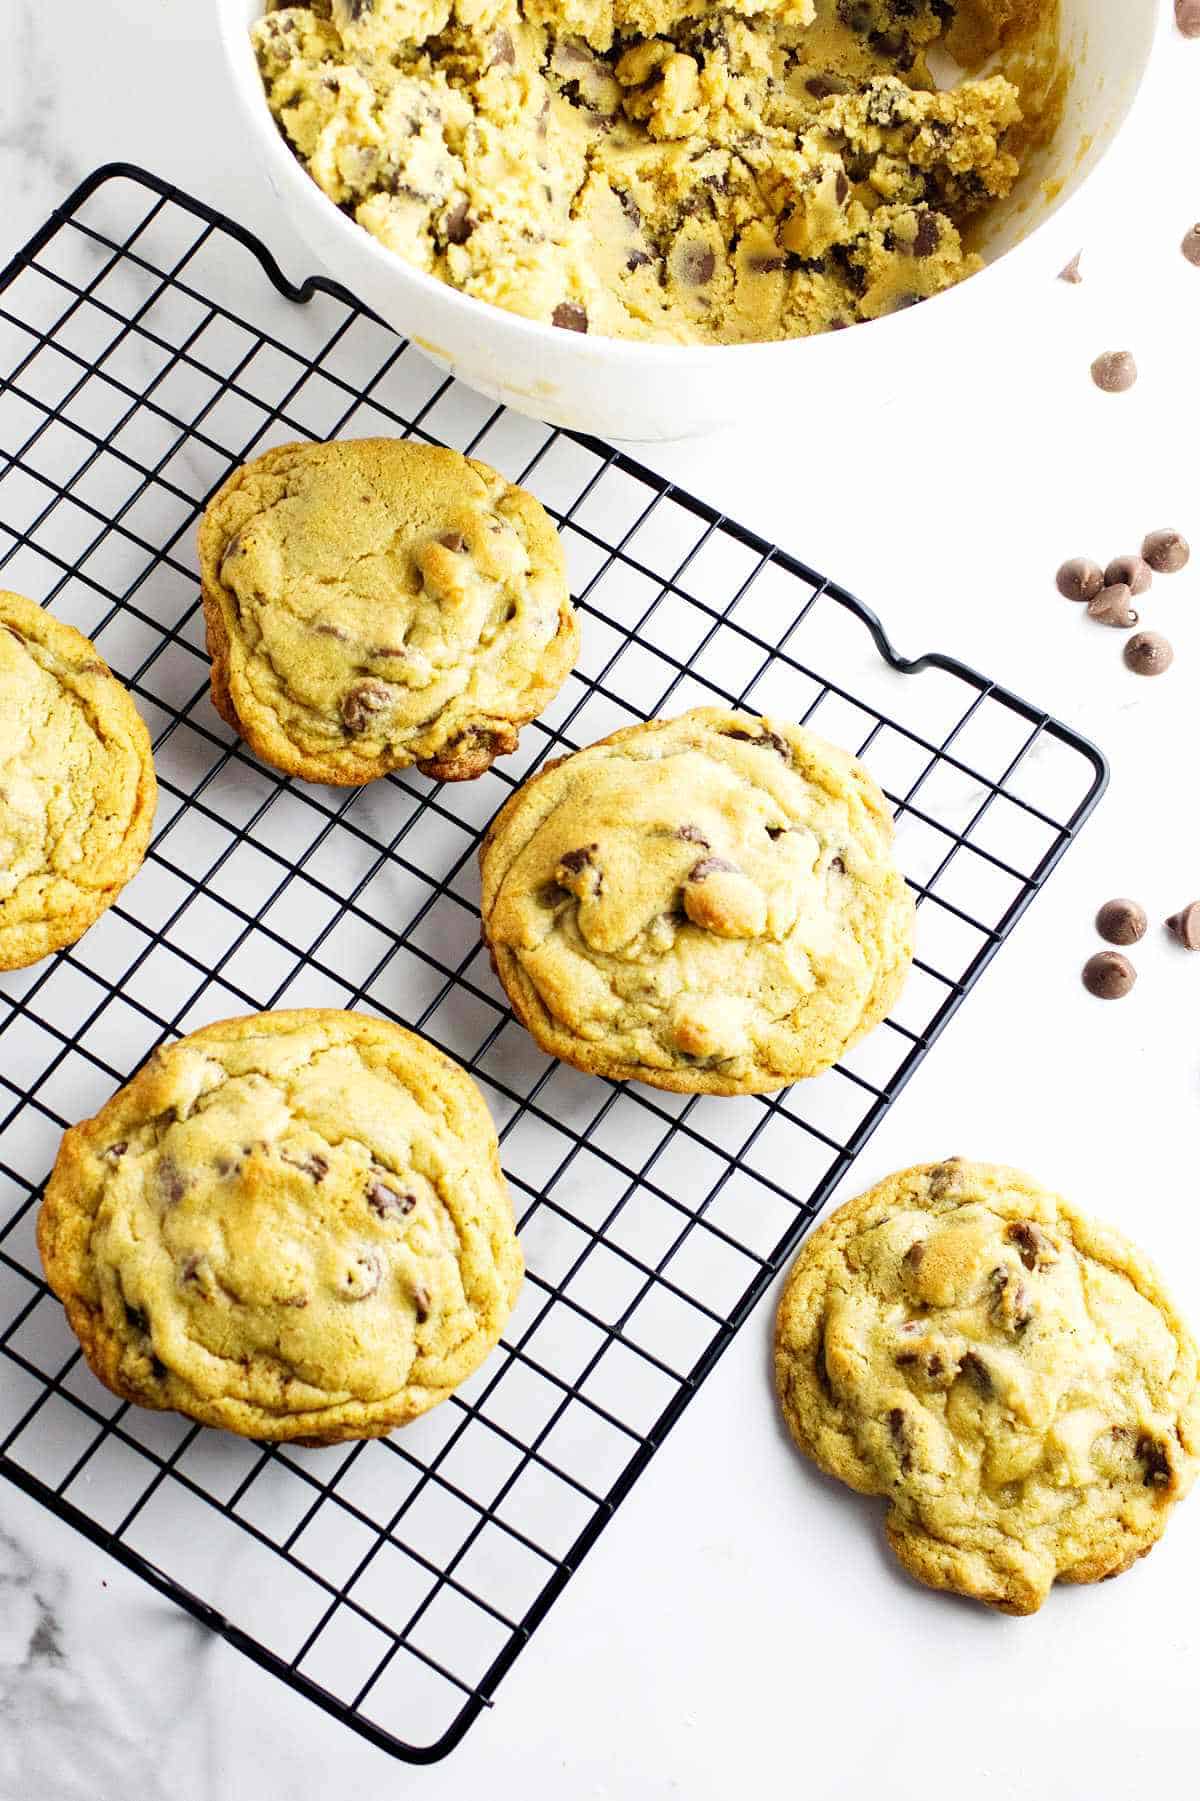 large bakery style chocolate chip cookies on a cooling rack against a white marble background.